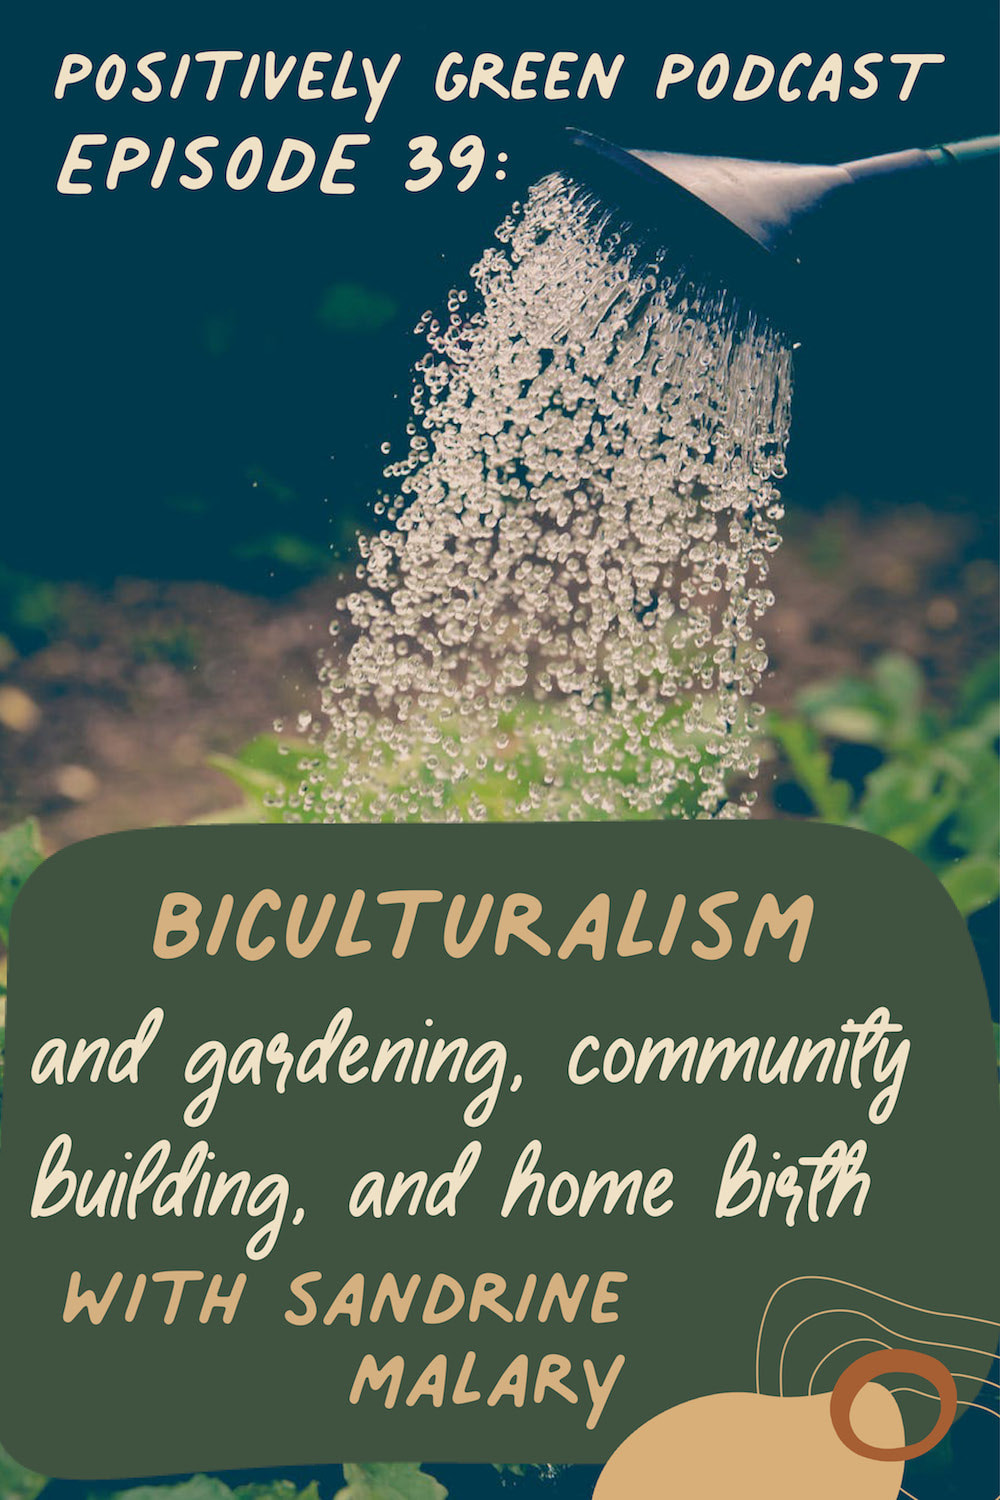 The Positively Green Podcast Episode 39 Biculturalism and gardening, community building, and home birth with Sandrine Malary